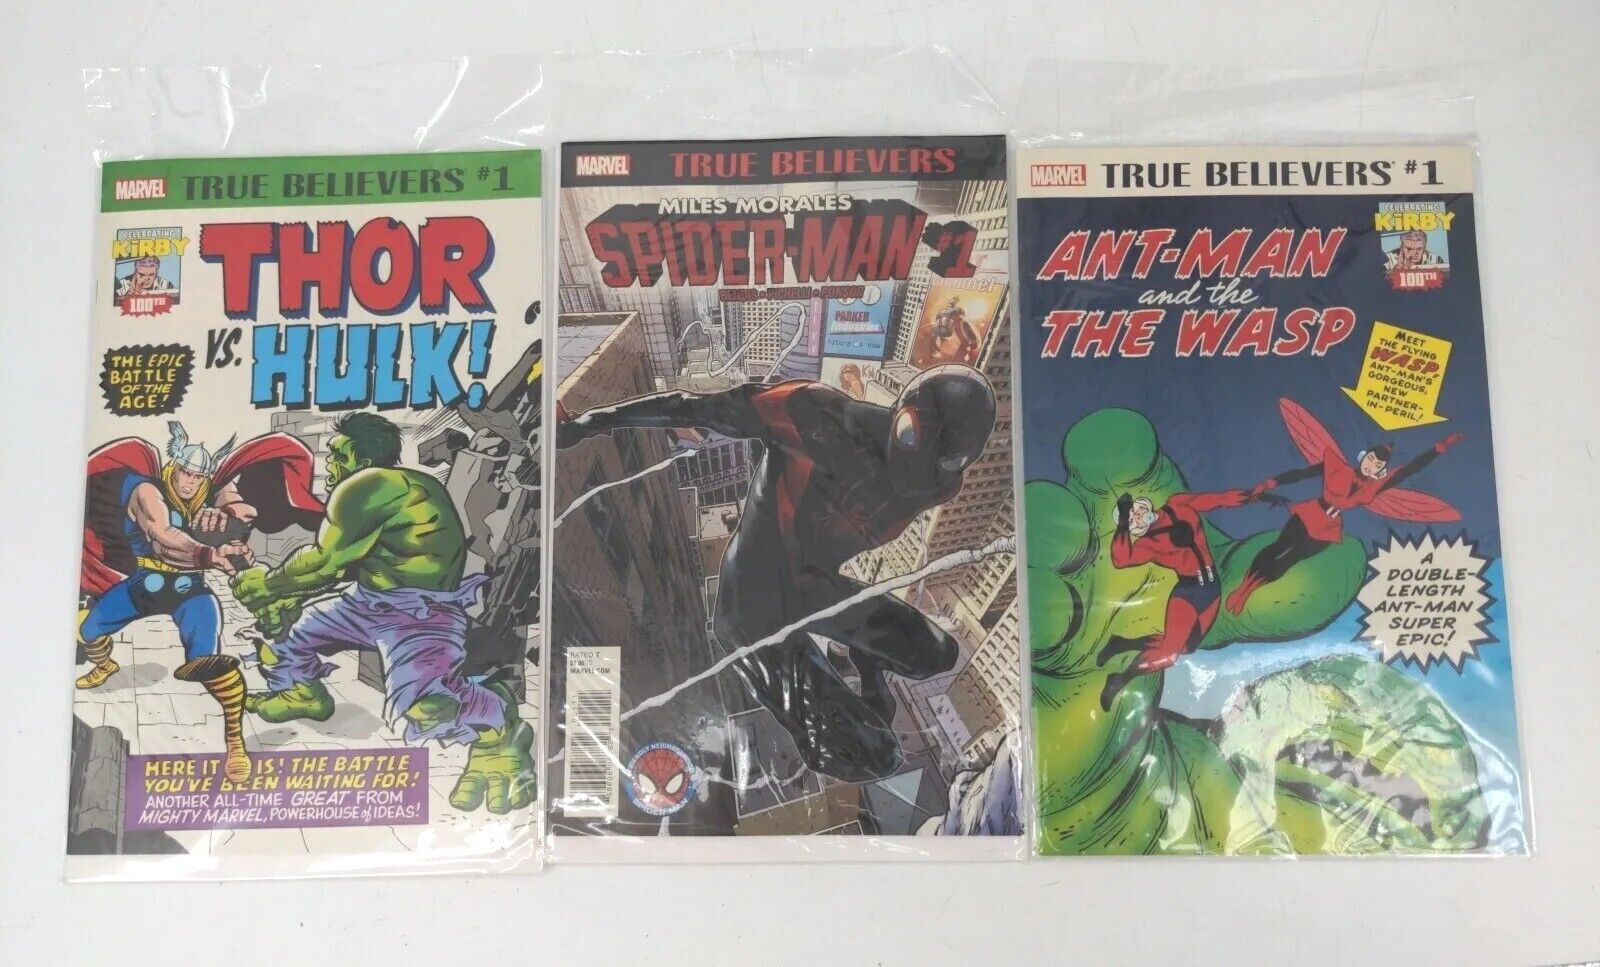 Lot of 3 True Believers: Ant-Man and the Wasp #1 Spiderman #1 Thor vs. Hulk